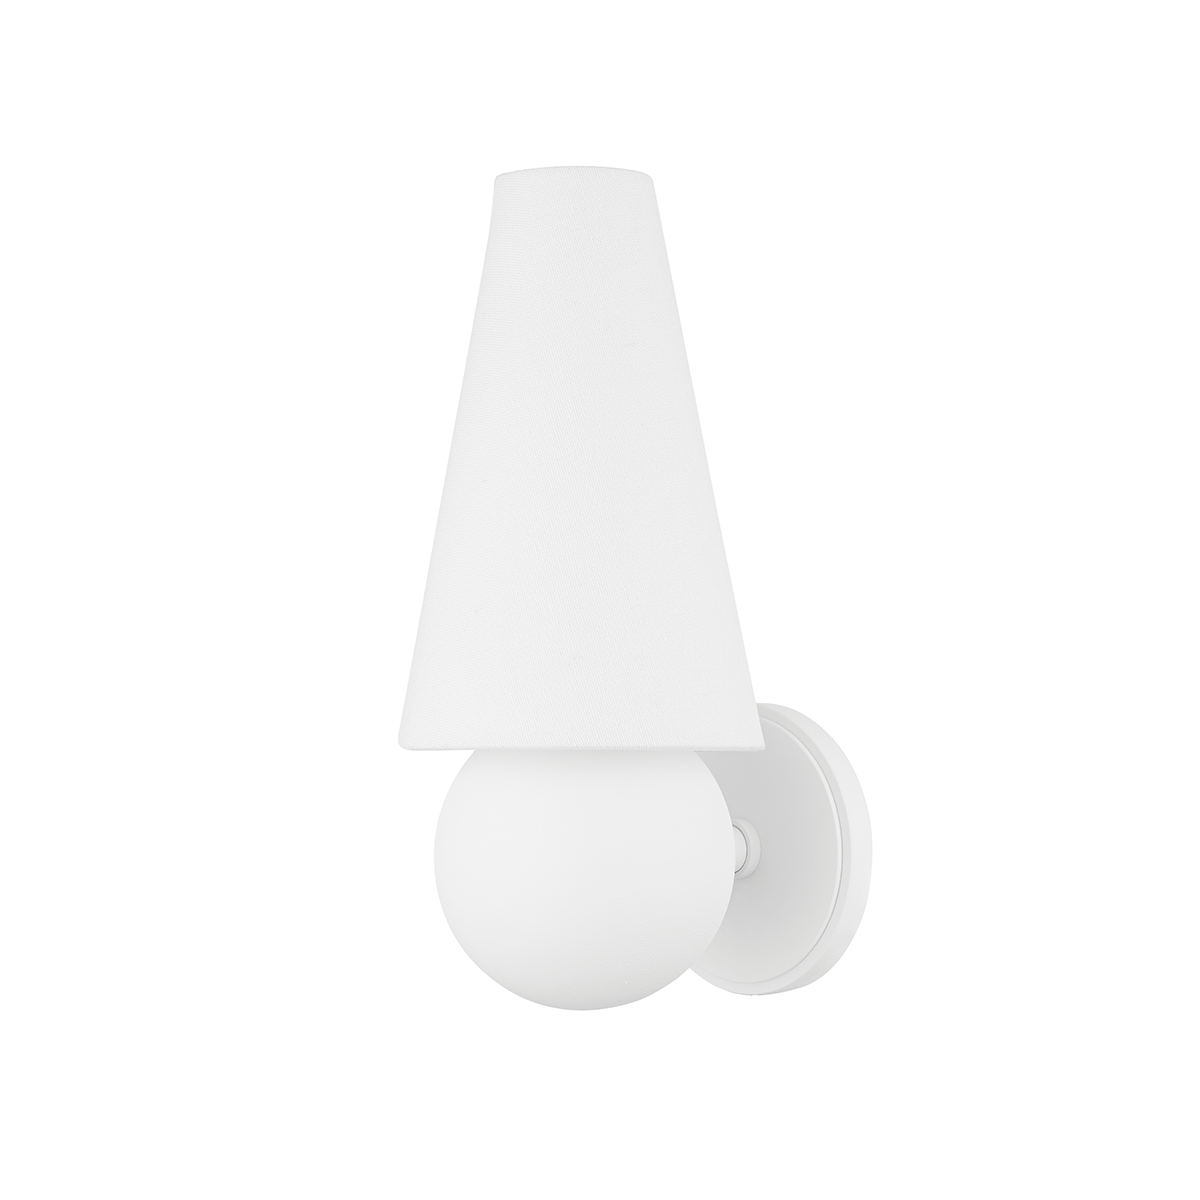 Troy Lighting Cassius Wall Sconce Wall Sconce Troy Lighting TEXTURED WHITE 5.75x5.75x13.5 